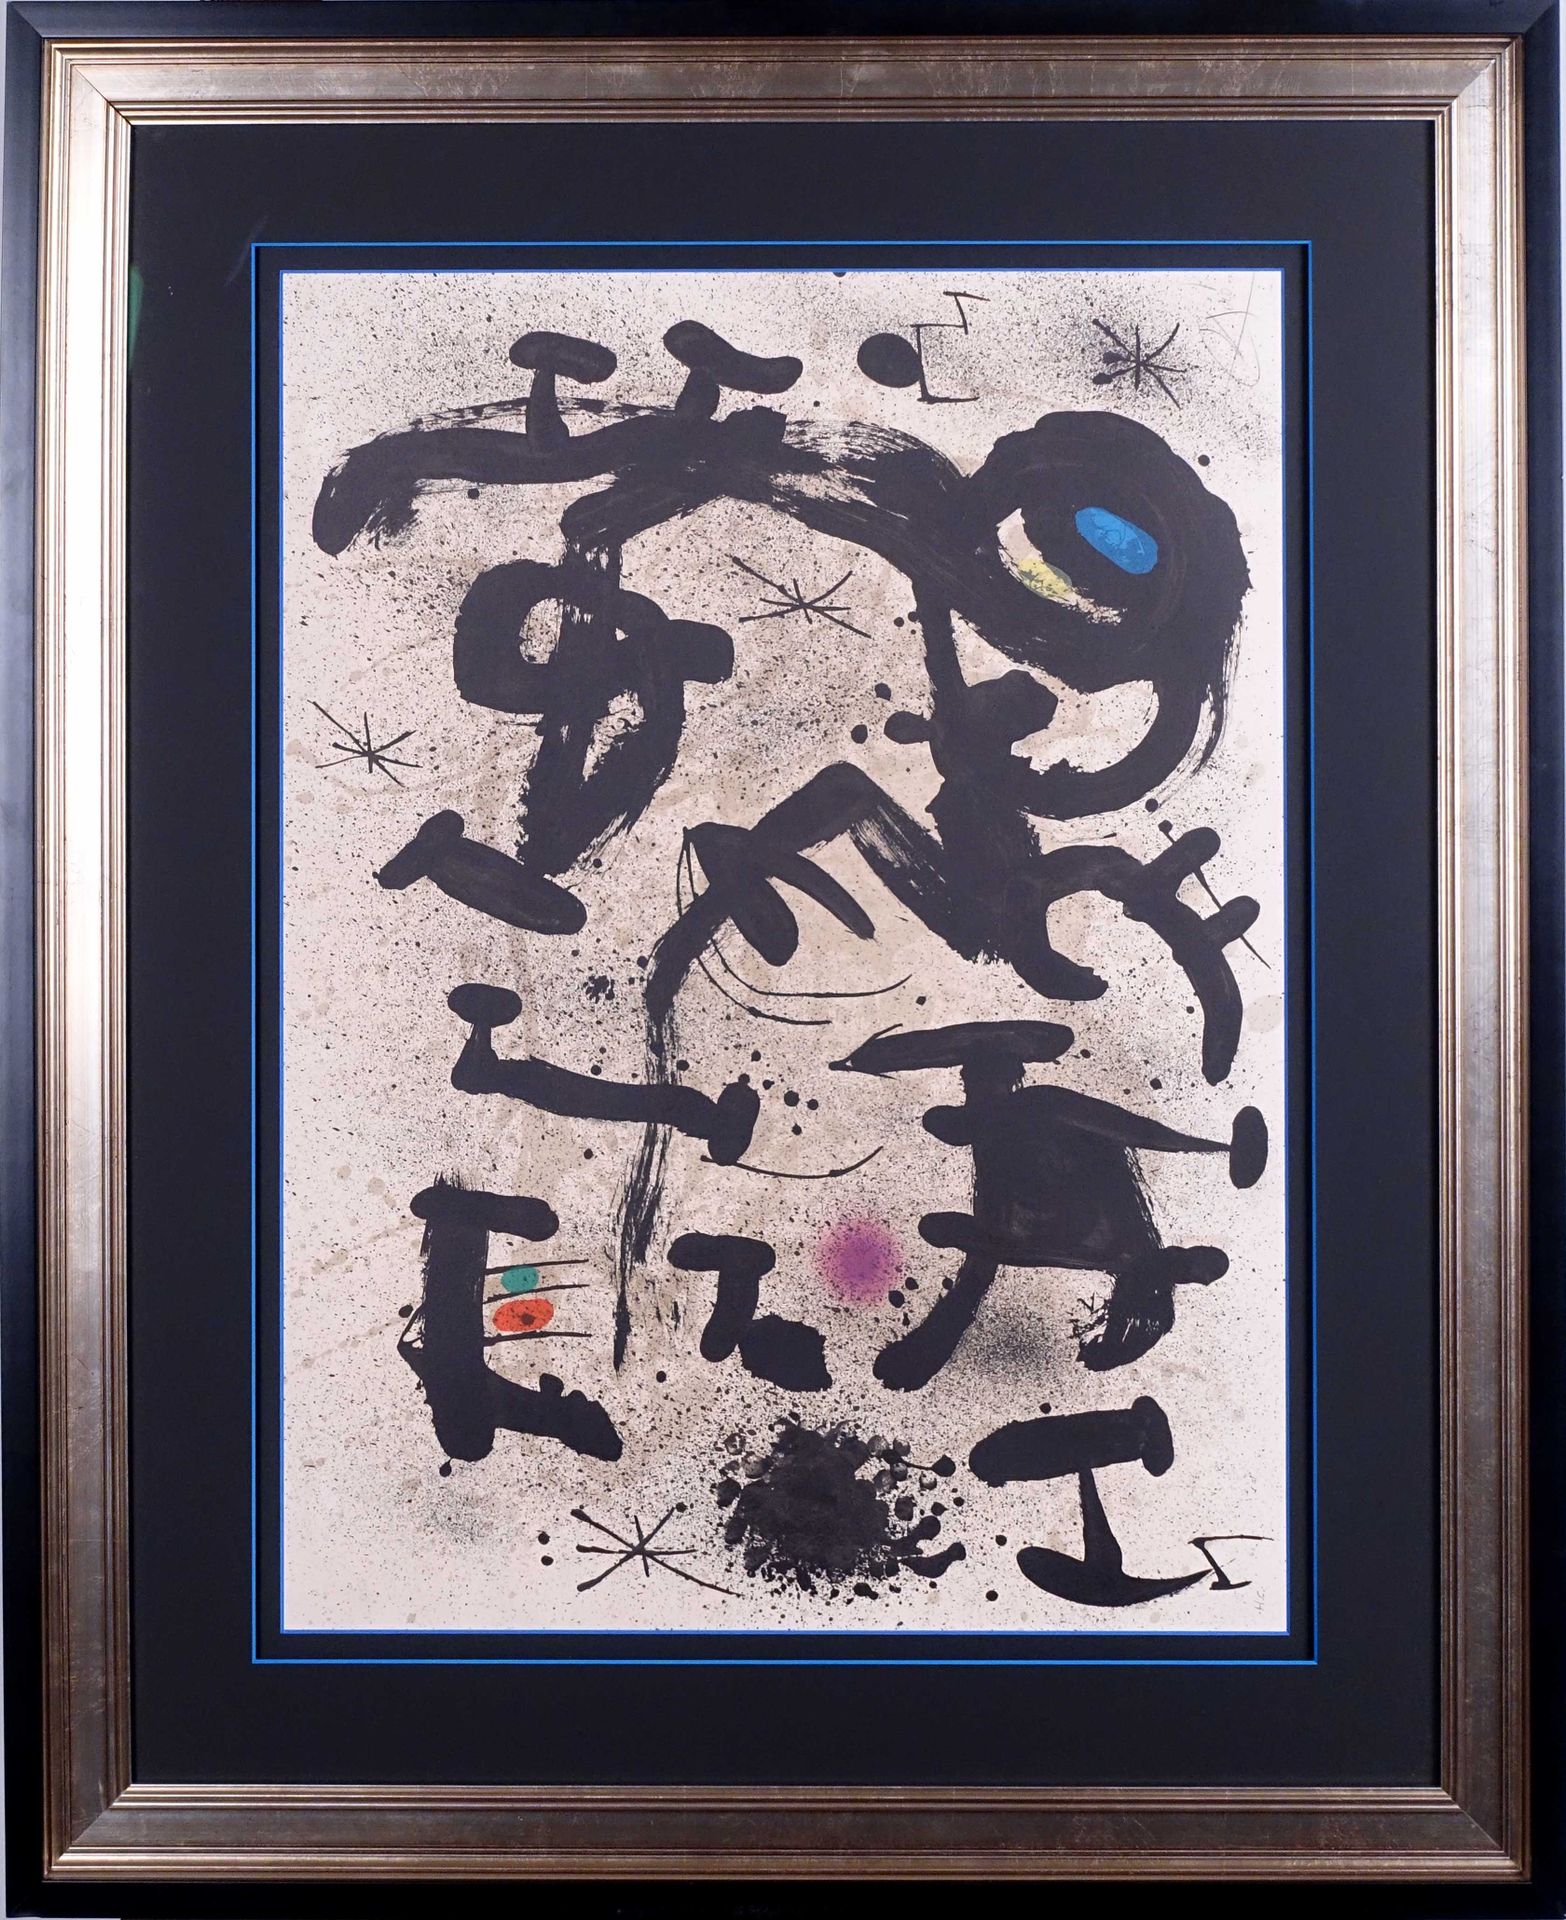 Joan MIRO (1893-1983). Untitled. Lithograph, off-print, signed lower right.